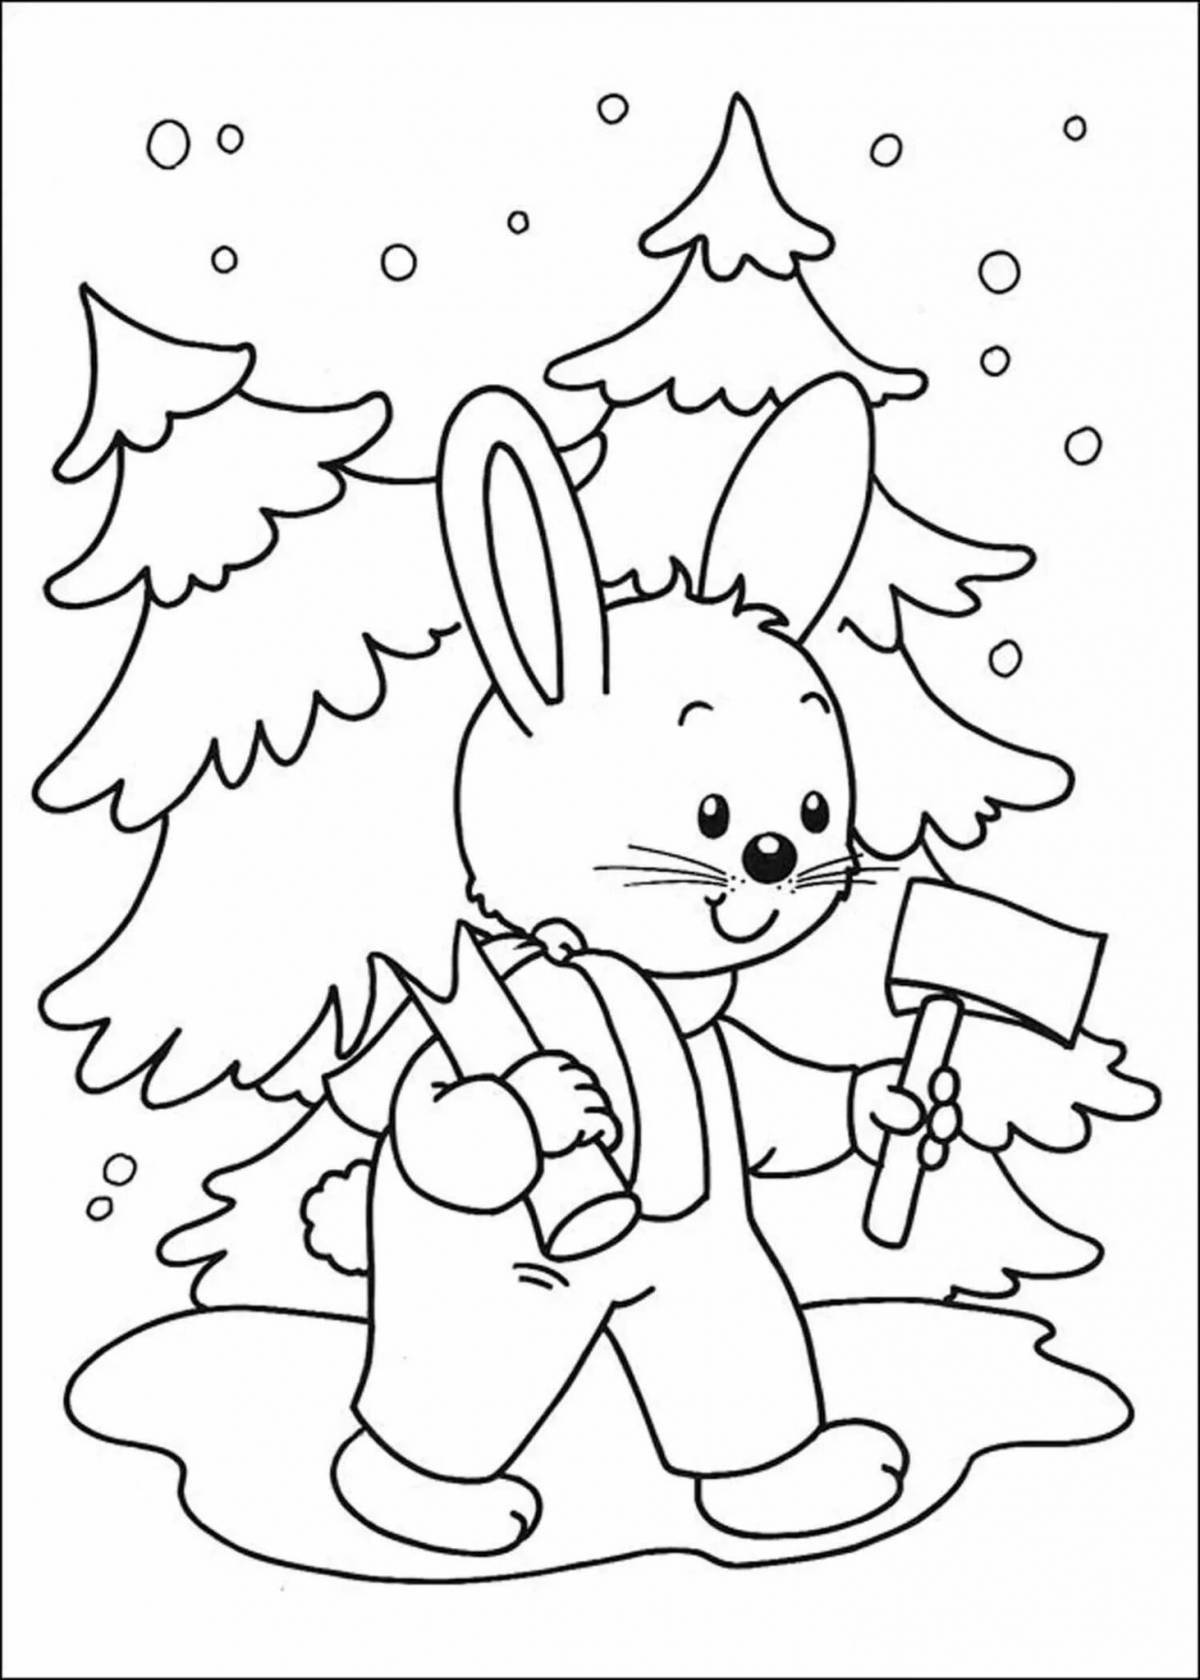 Rainbow Christmas coloring book for kids